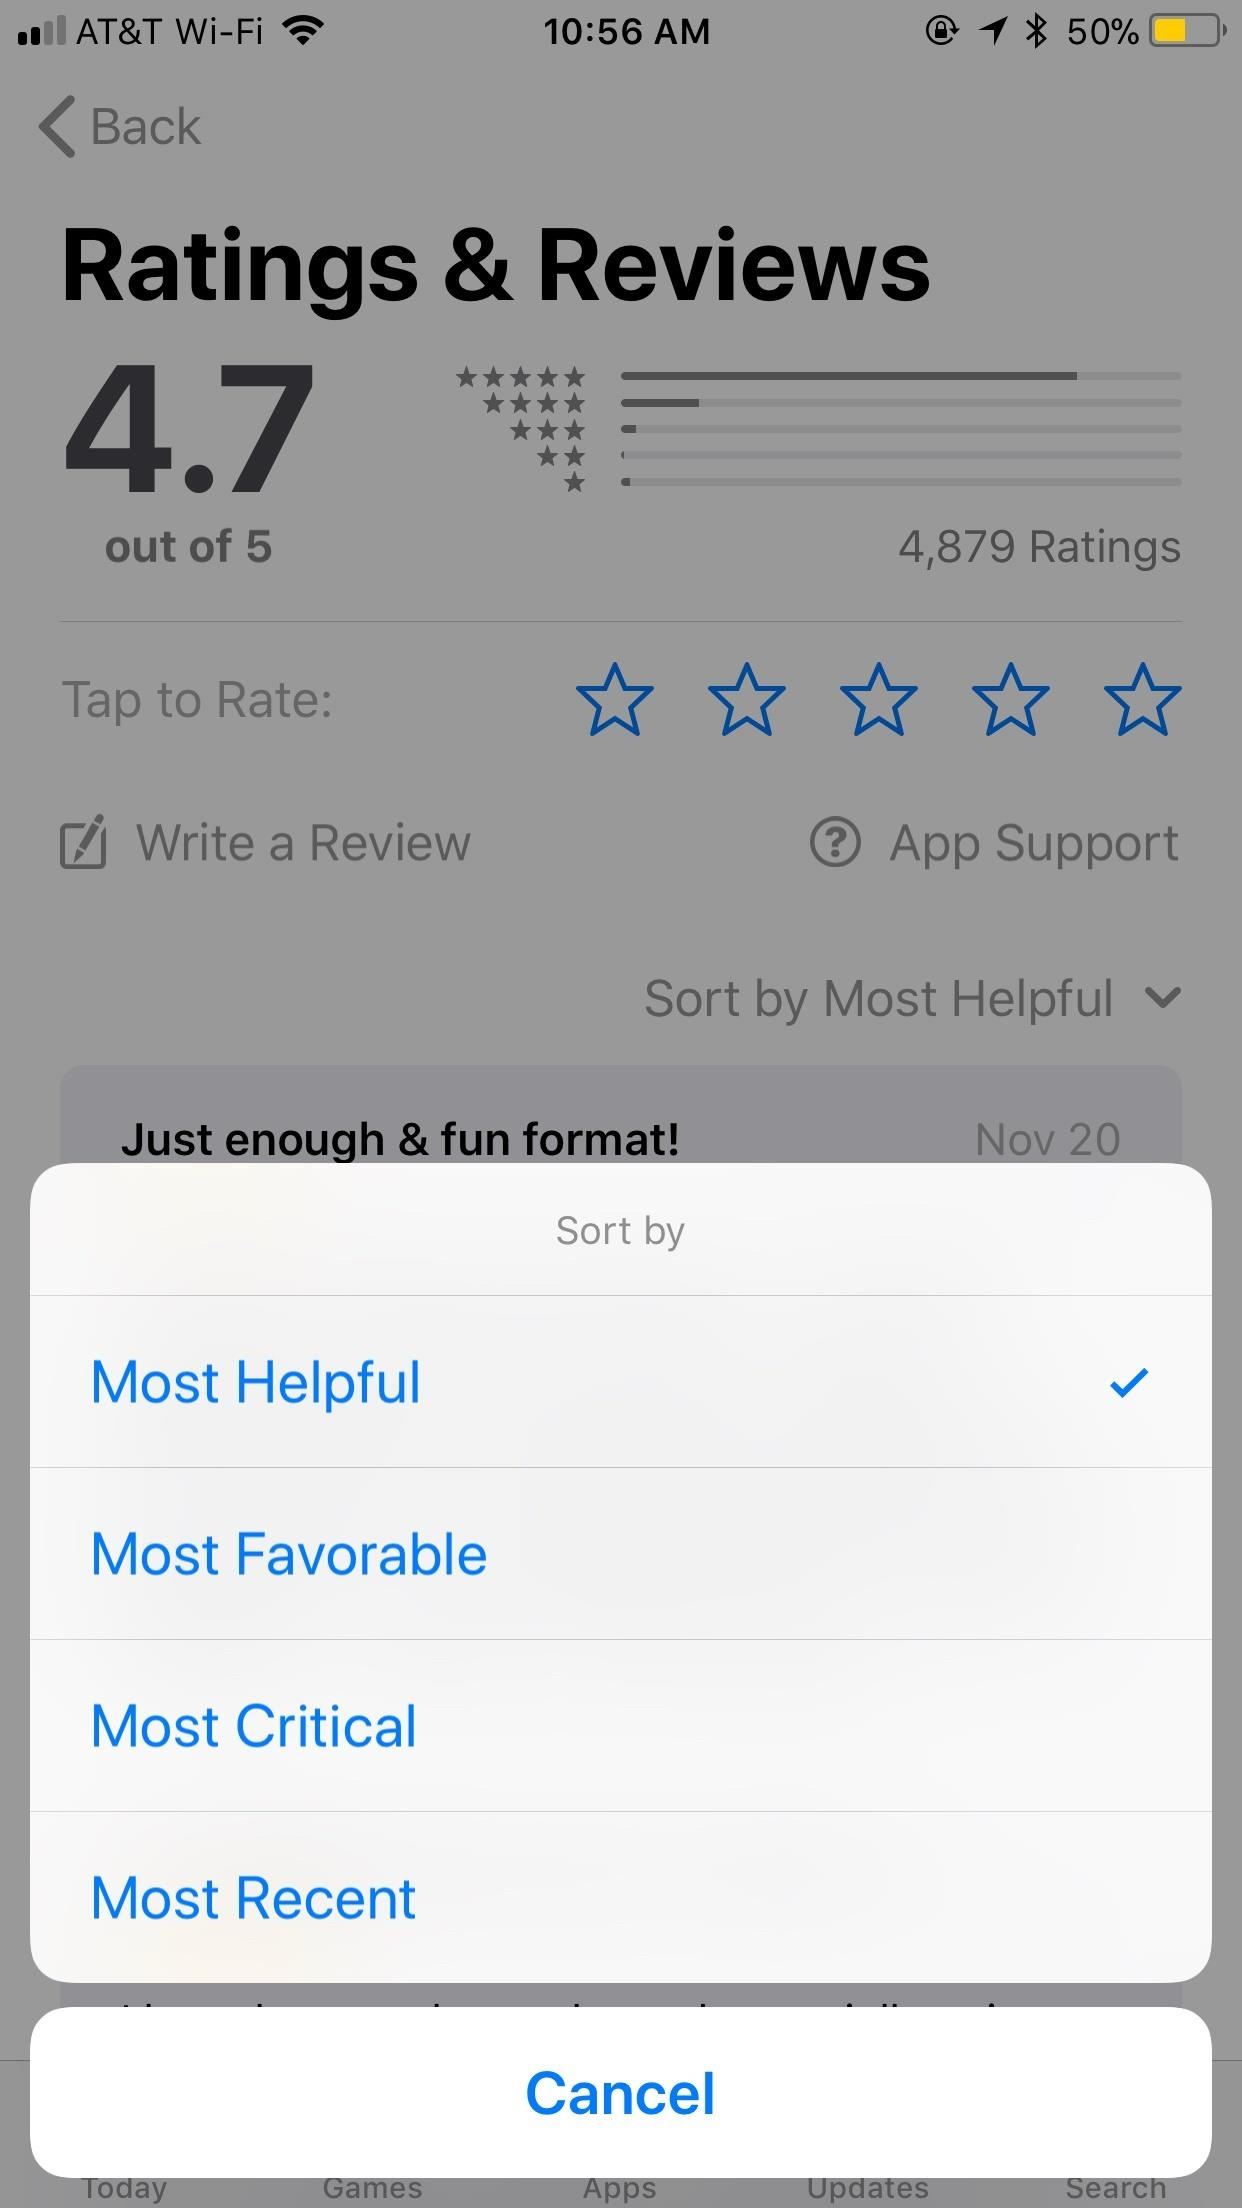 How to Sort App Store Reviews on Your iPhone in iOS 11.3